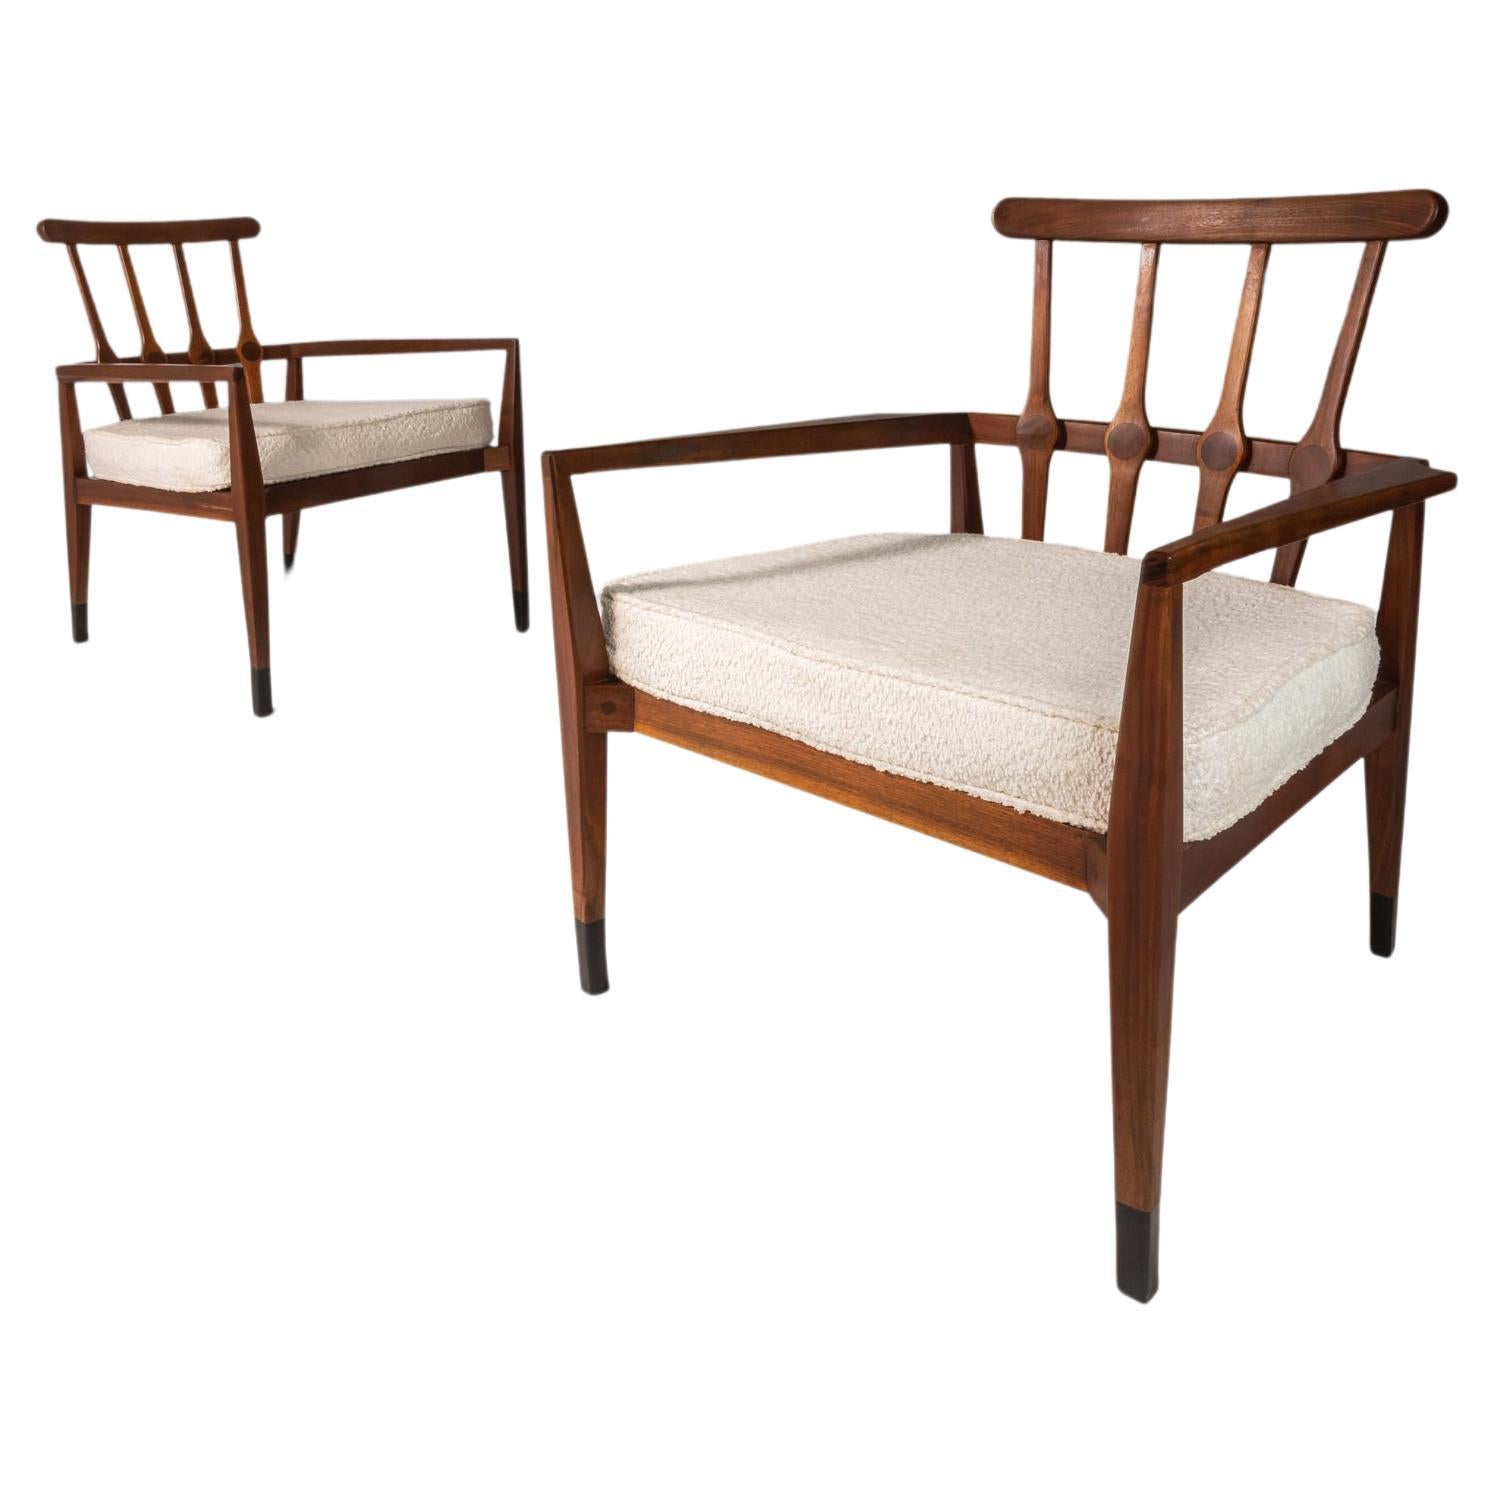 Set of Two (2) Angular Arm Chairs in Walnut & Bouclé by Foster McDavid, c. 1960s For Sale